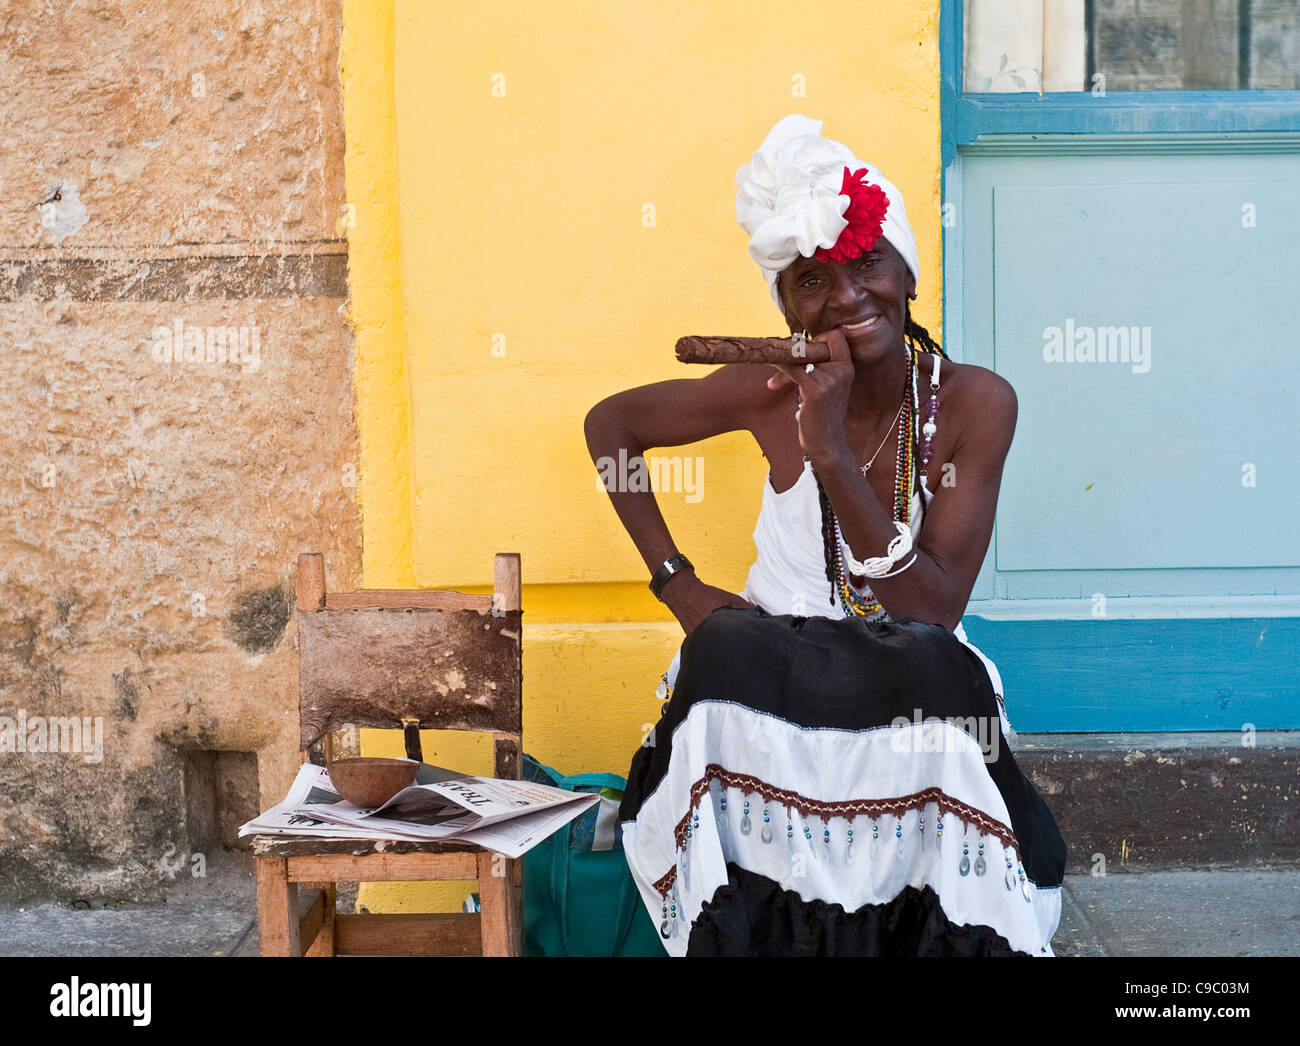 Cuba, Caribbean, Havana Old Town, Cigar Lady holding large cigar charges tourists $1 for a picture. Stock Photo